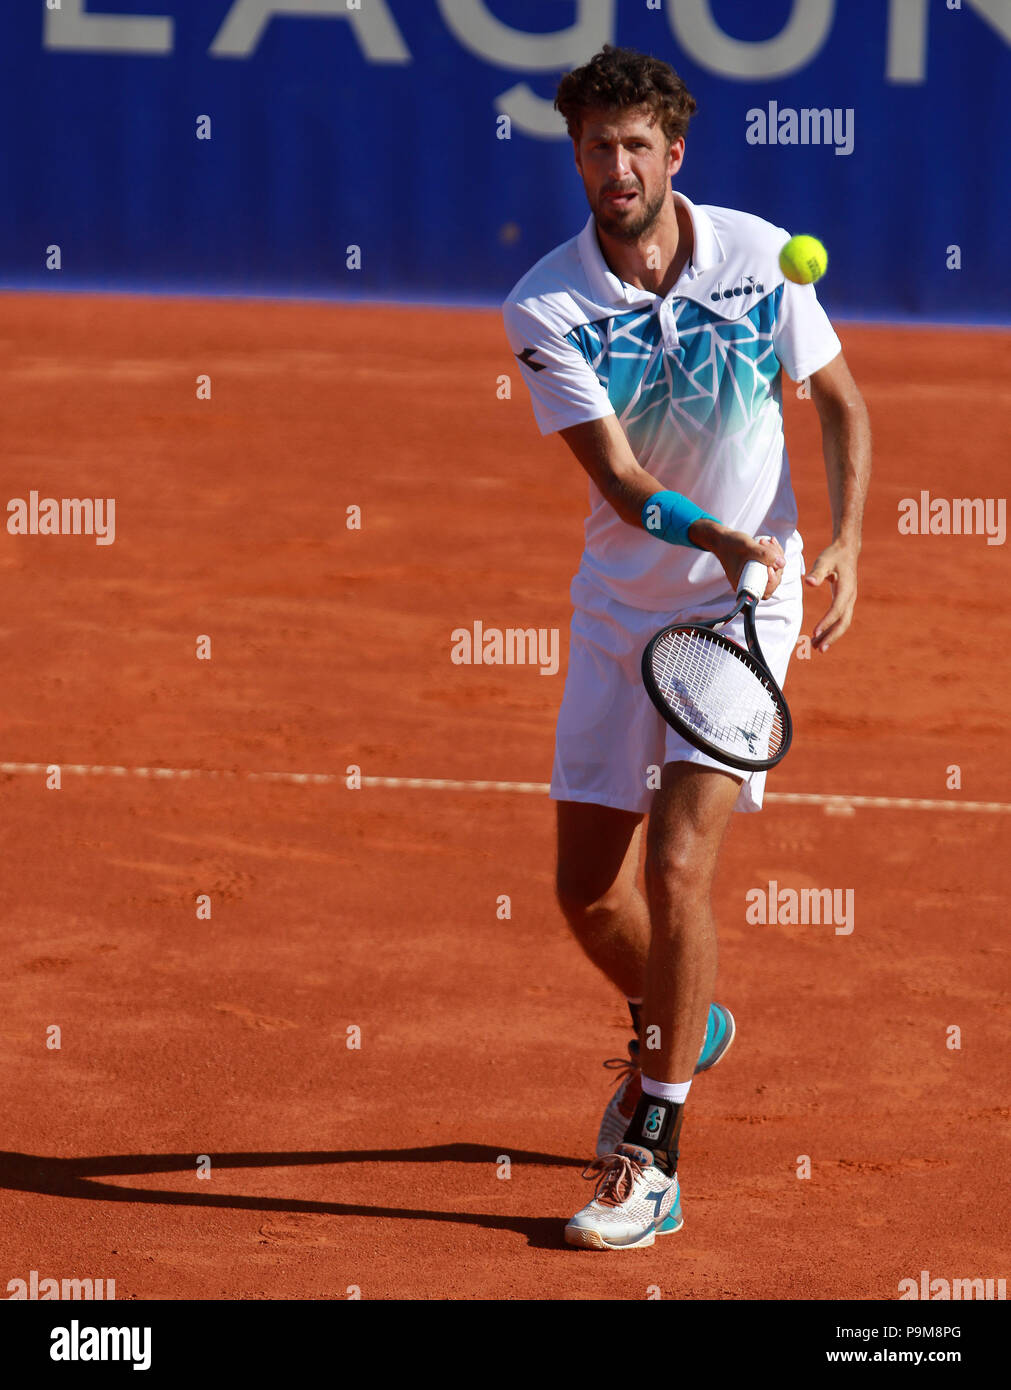 Umag, CROATIA, Umag: Robin Haase of Holland controls the ball during the singles match Klizan v Haase at the ATP 29th Plava laguna Croatia Open Umag tournament at the at the Goran Ivanisevic ATP Stadium, on July 19, 2018 in Umag. Credit: Andrea Spinelli/Alamy Live News Stock Photo